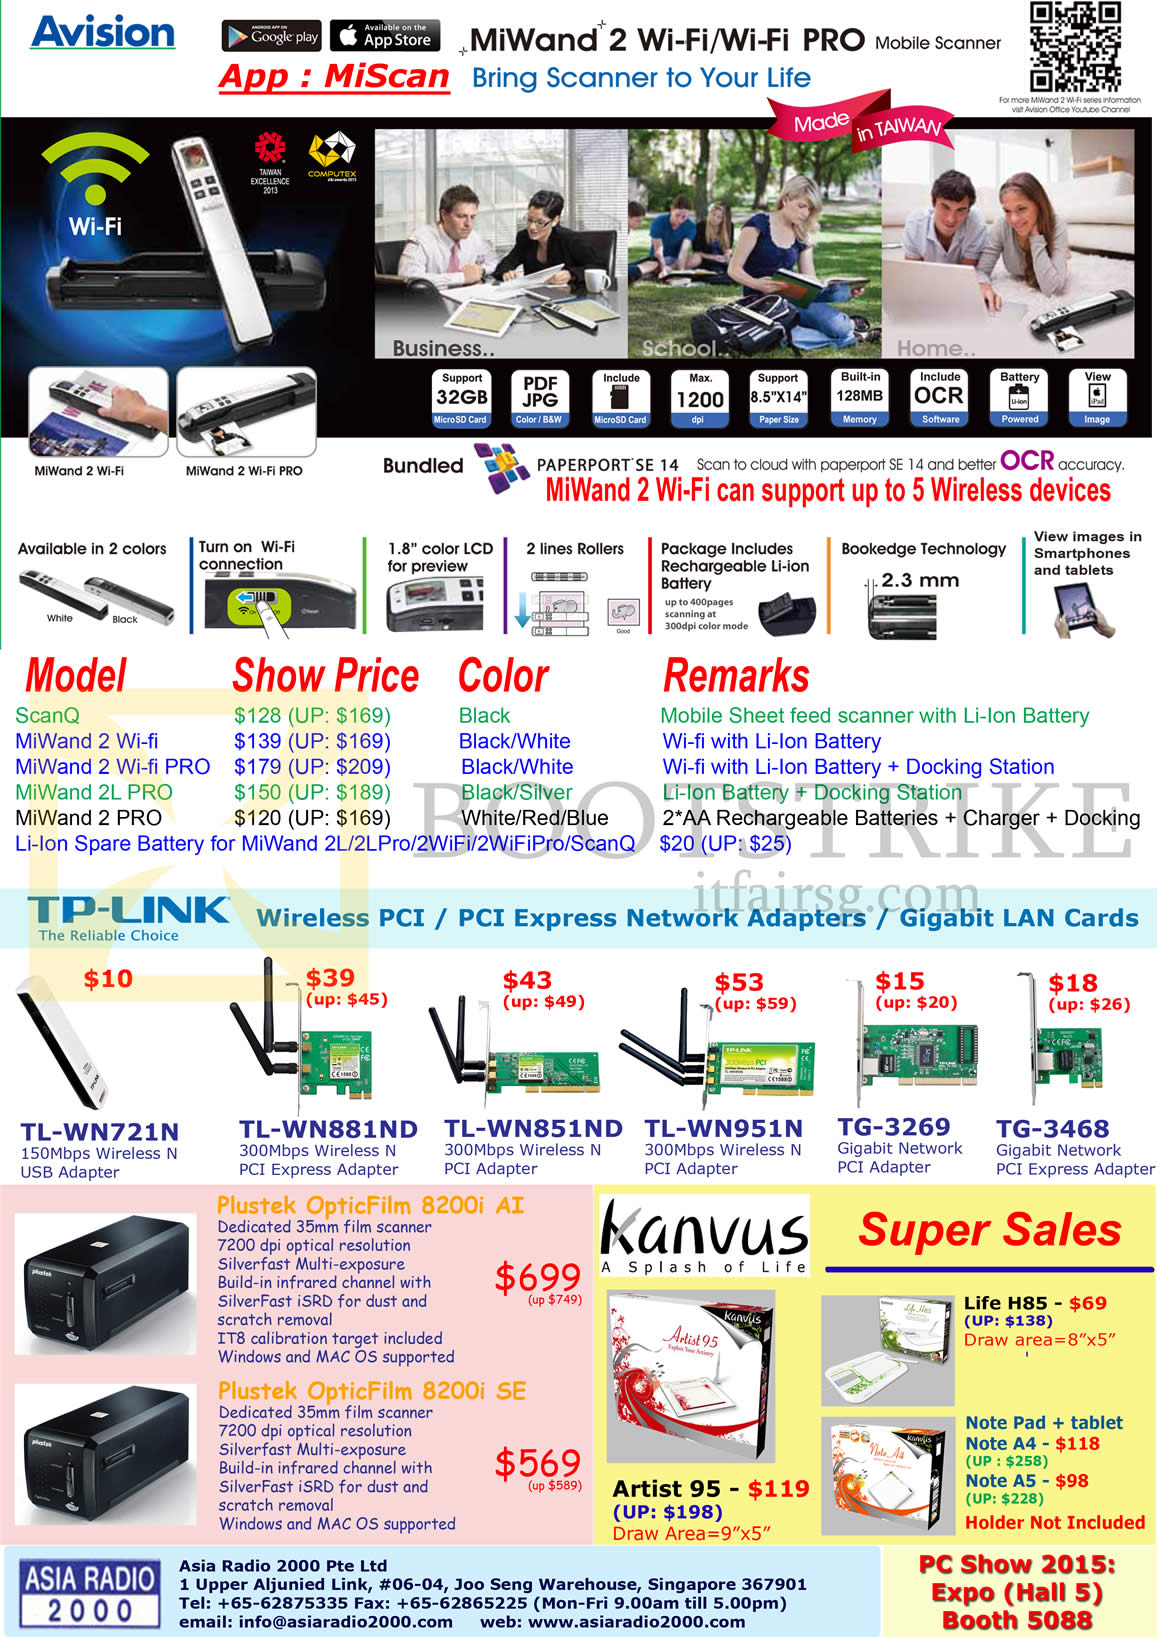 PC SHOW 2015 price list image brochure of Asia Radio TP-Link Networking Avision TP-Link Wireless PCI, MiWand, TL-WN721N, TL-WN881ND, TL-WN851ND, TL-WN951N, TG-3269, TG-3468, Plustek OpticFlim 8200i AI SE